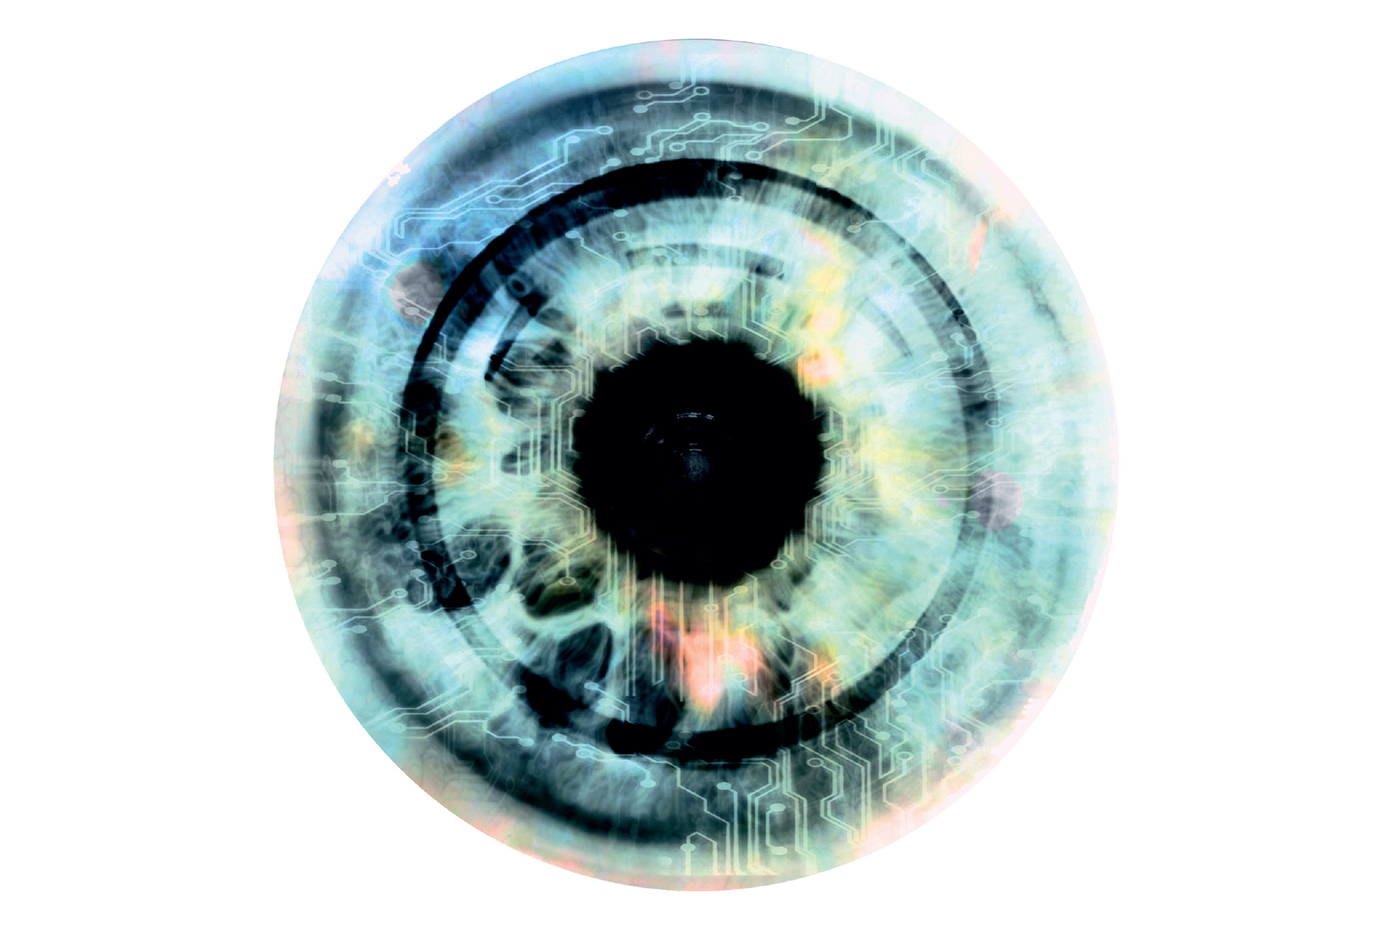 An image of co-author John D. Wood's eye created using artificial intelligence. Courtesy of Nada Sanders